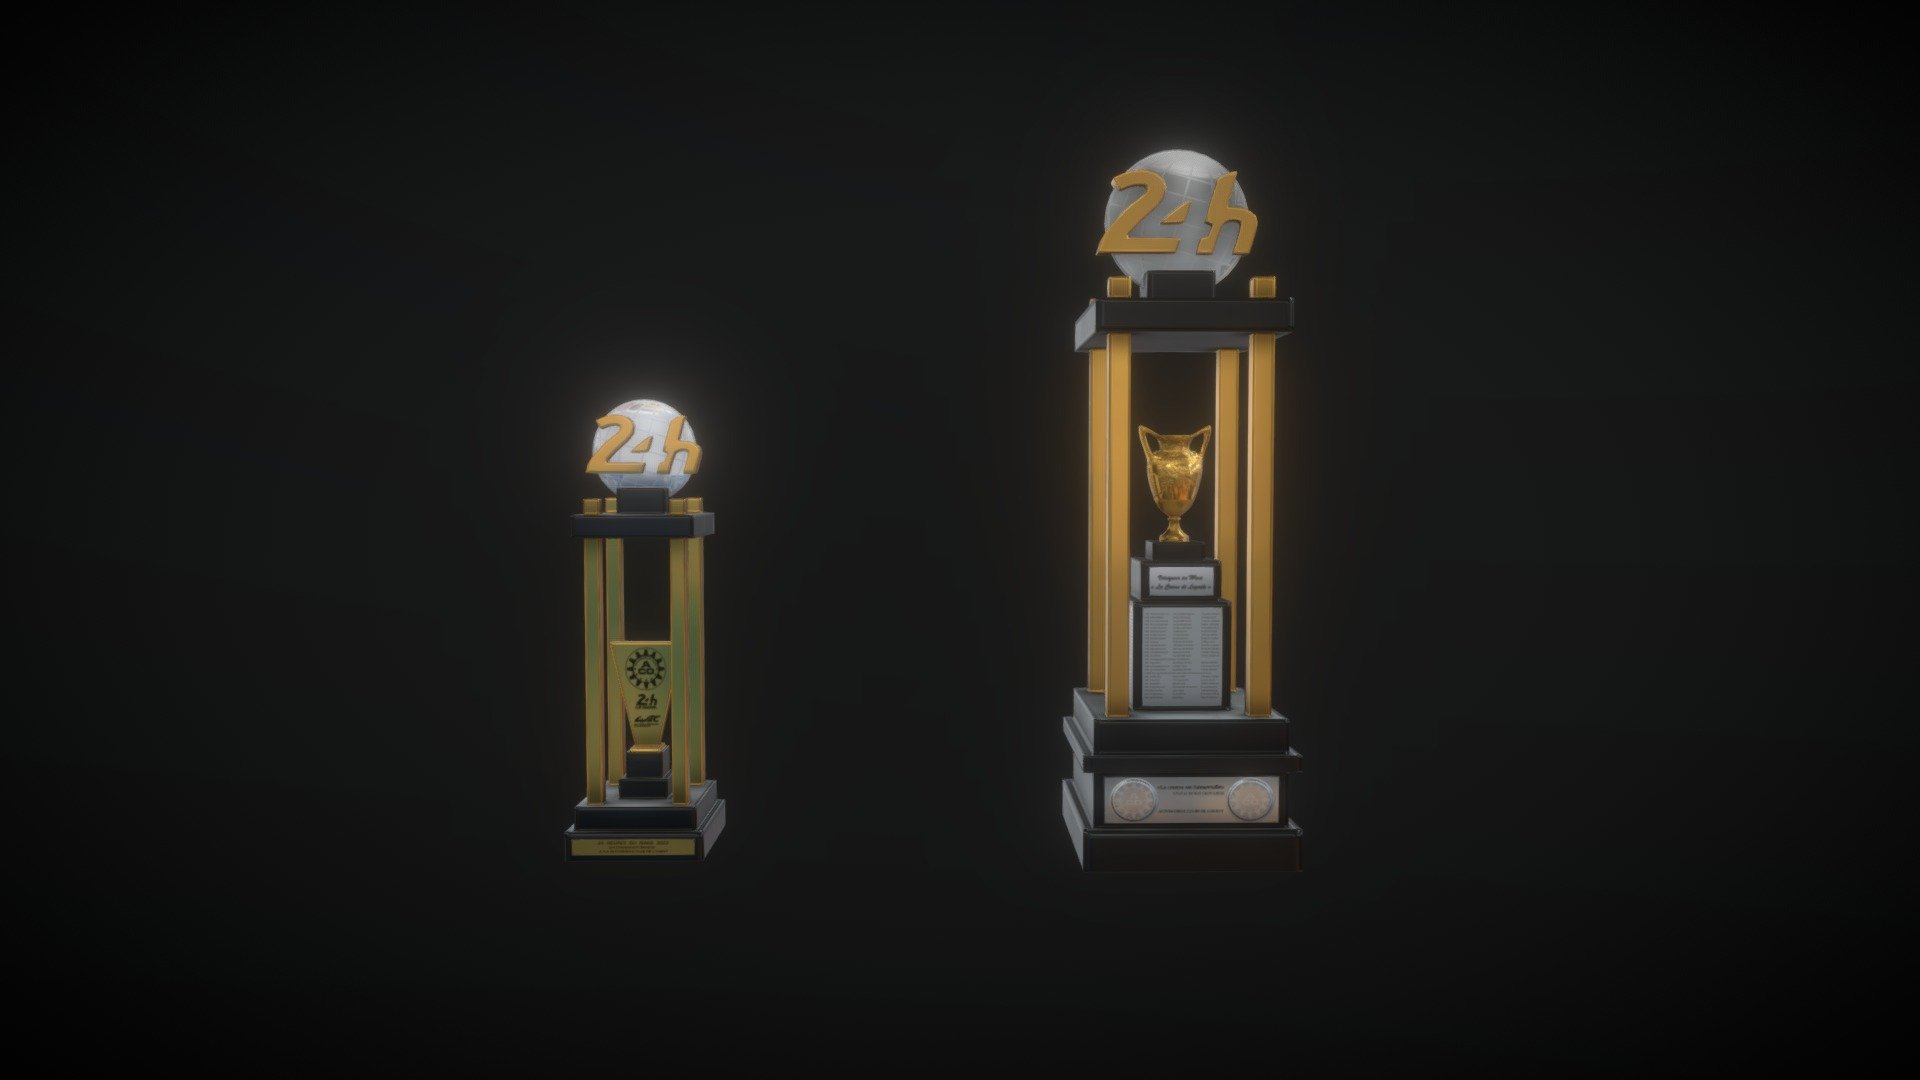 Trophies awarded to the winners of the of the 24hrs of Le Mans (Overall Race Winner Trophy, Class Winner Trophy). Both Models come with PBR textures in .blend, .obj, .fbx and watertight .stl files for 3D printing 3d model